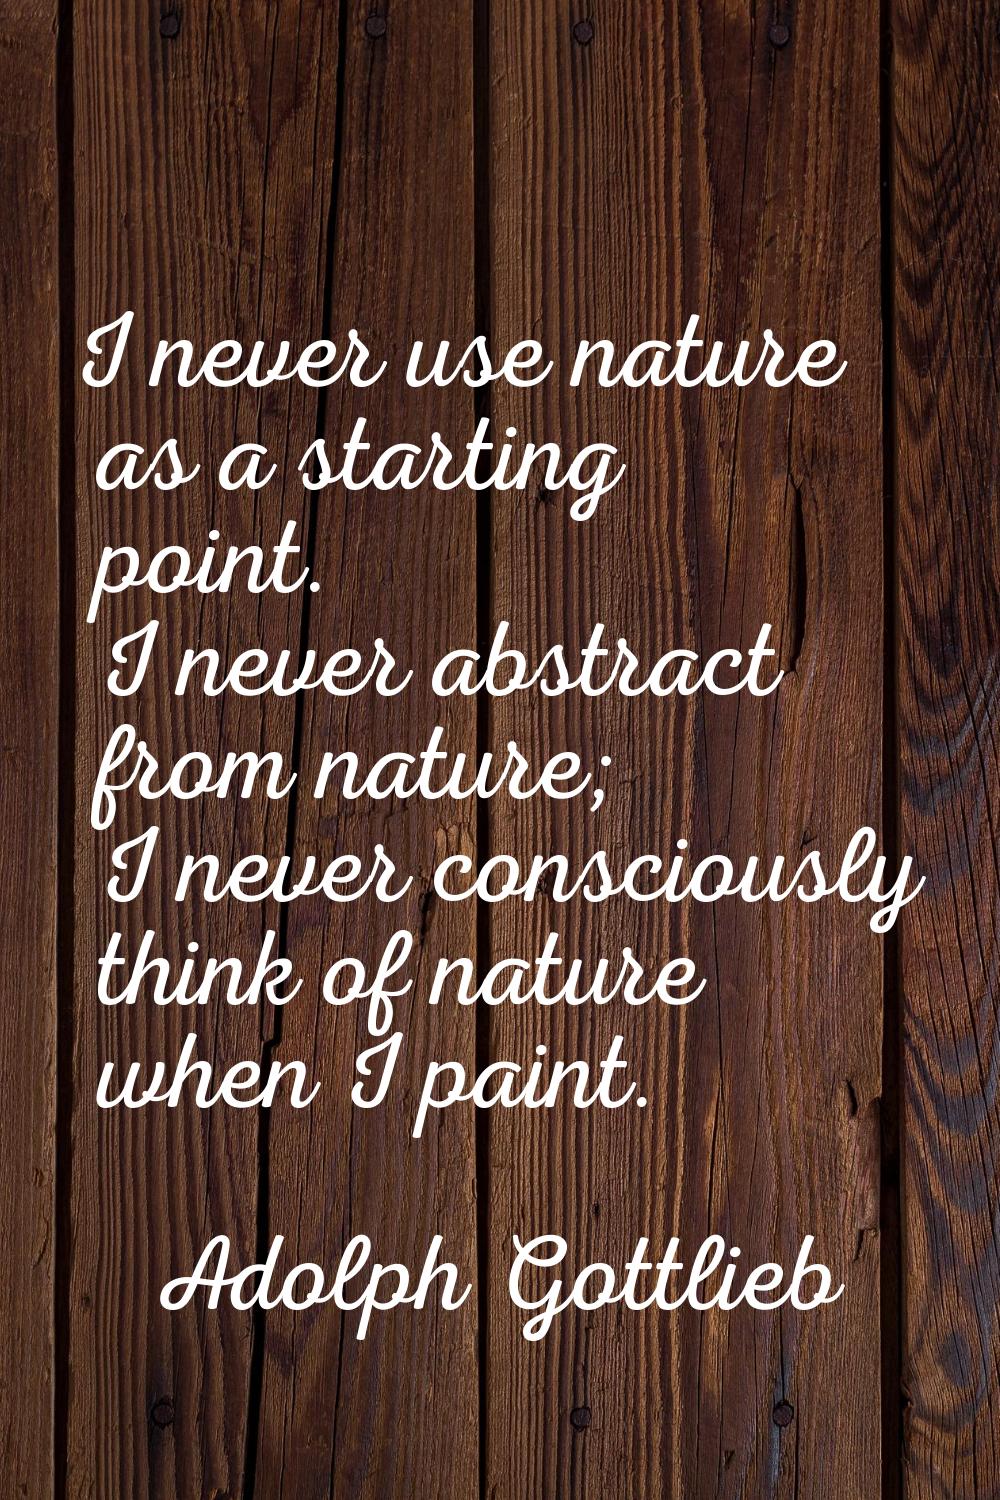 I never use nature as a starting point. I never abstract from nature; I never consciously think of 